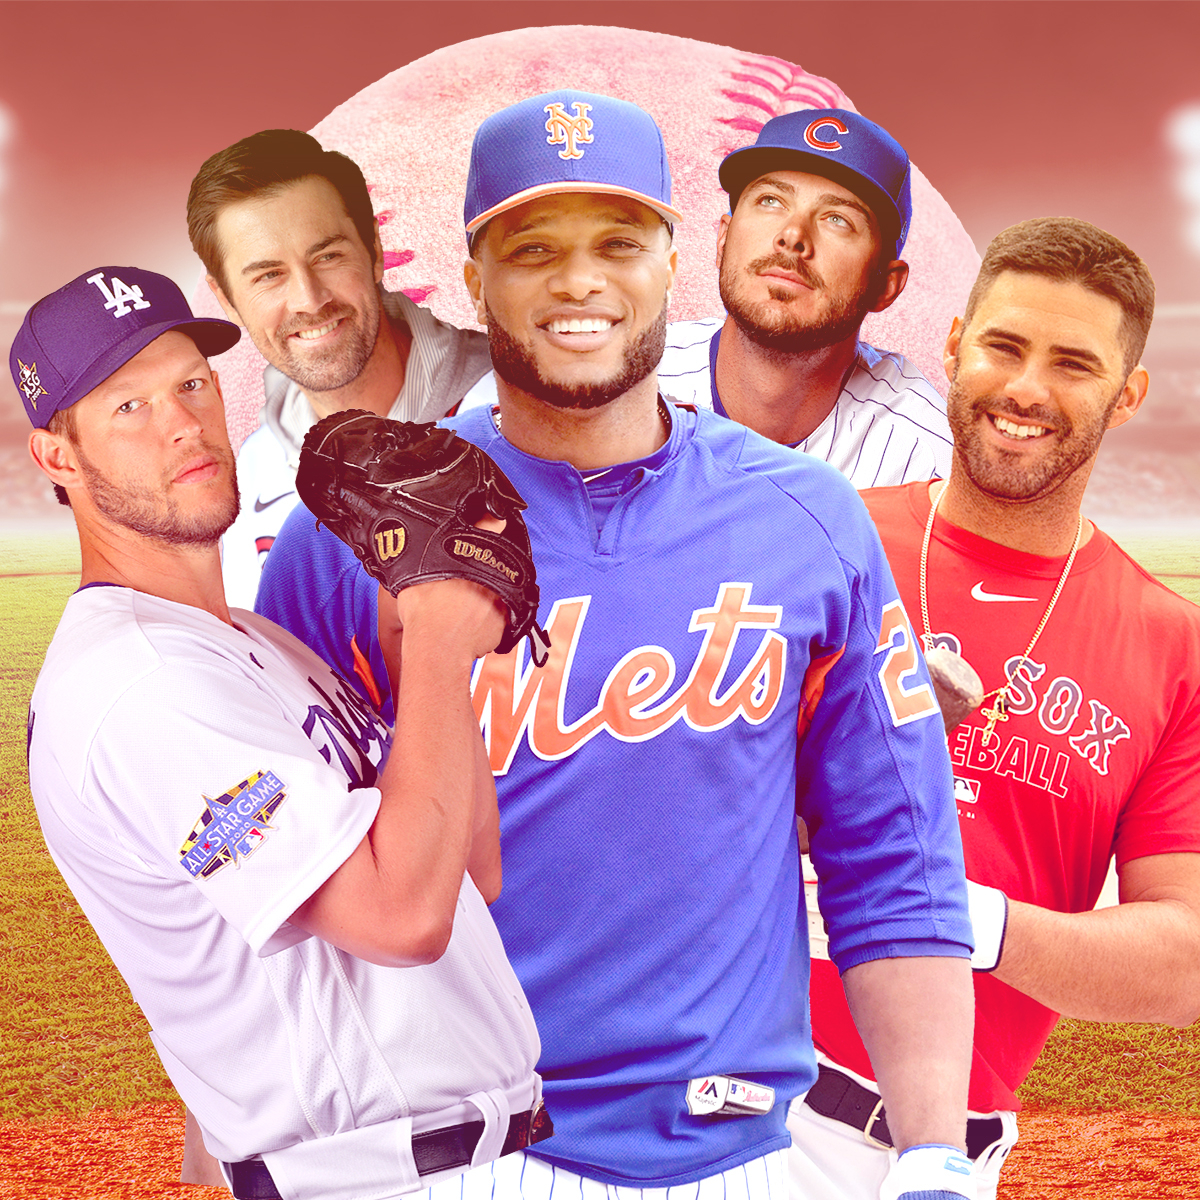 Get Your MLB Fix By Learning More About These Cute Baseball Pros